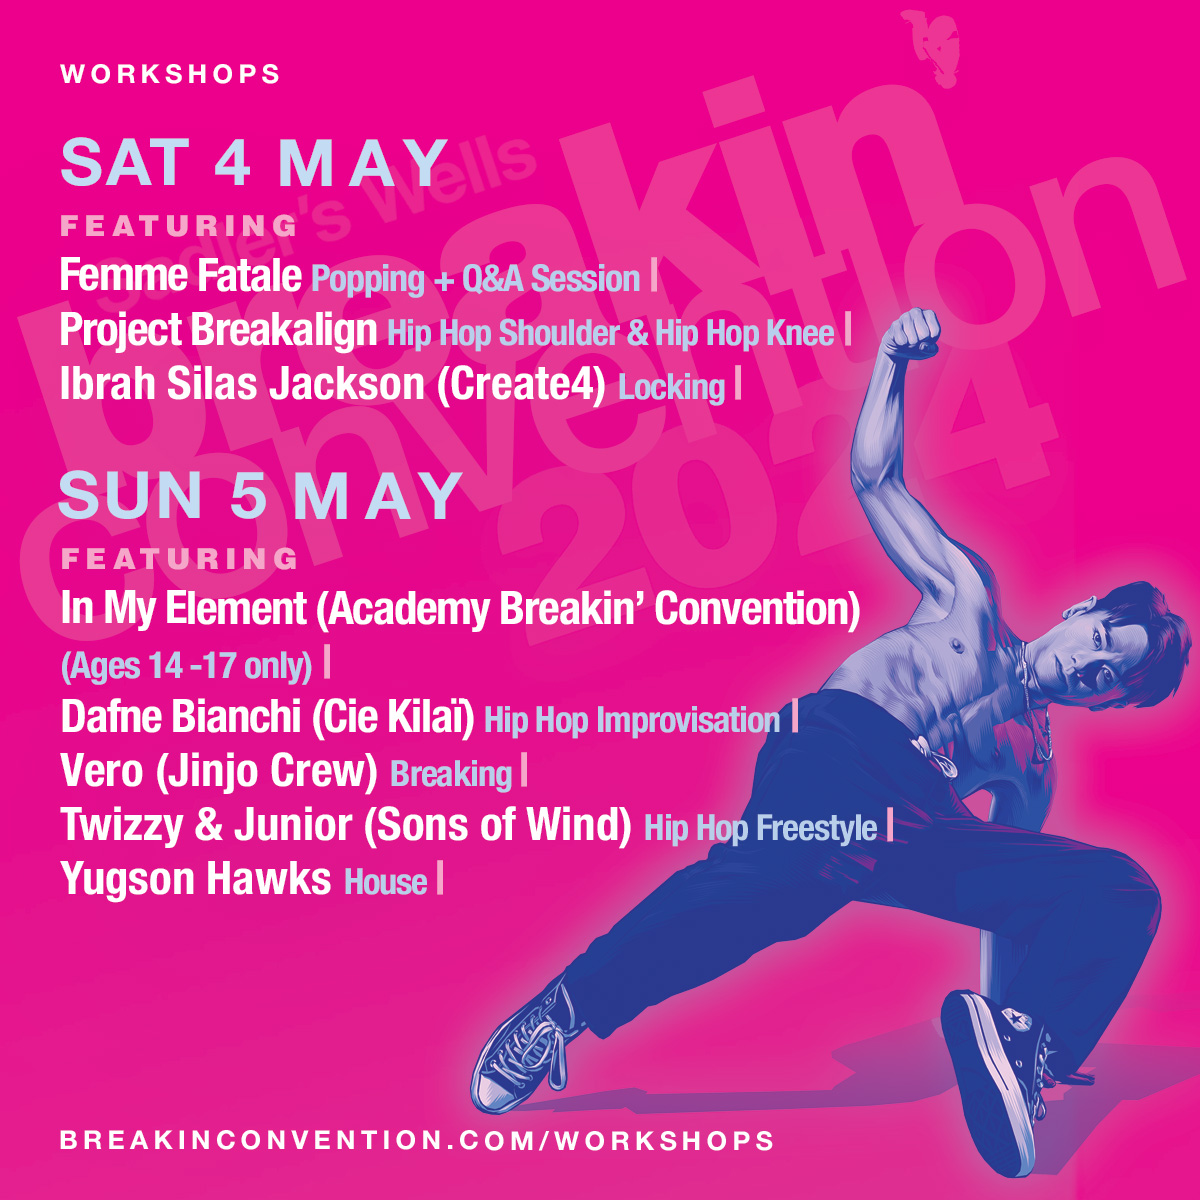 Take a workshop at Breakin' Convention this May bank holiday! breakinconvention.com/workshops